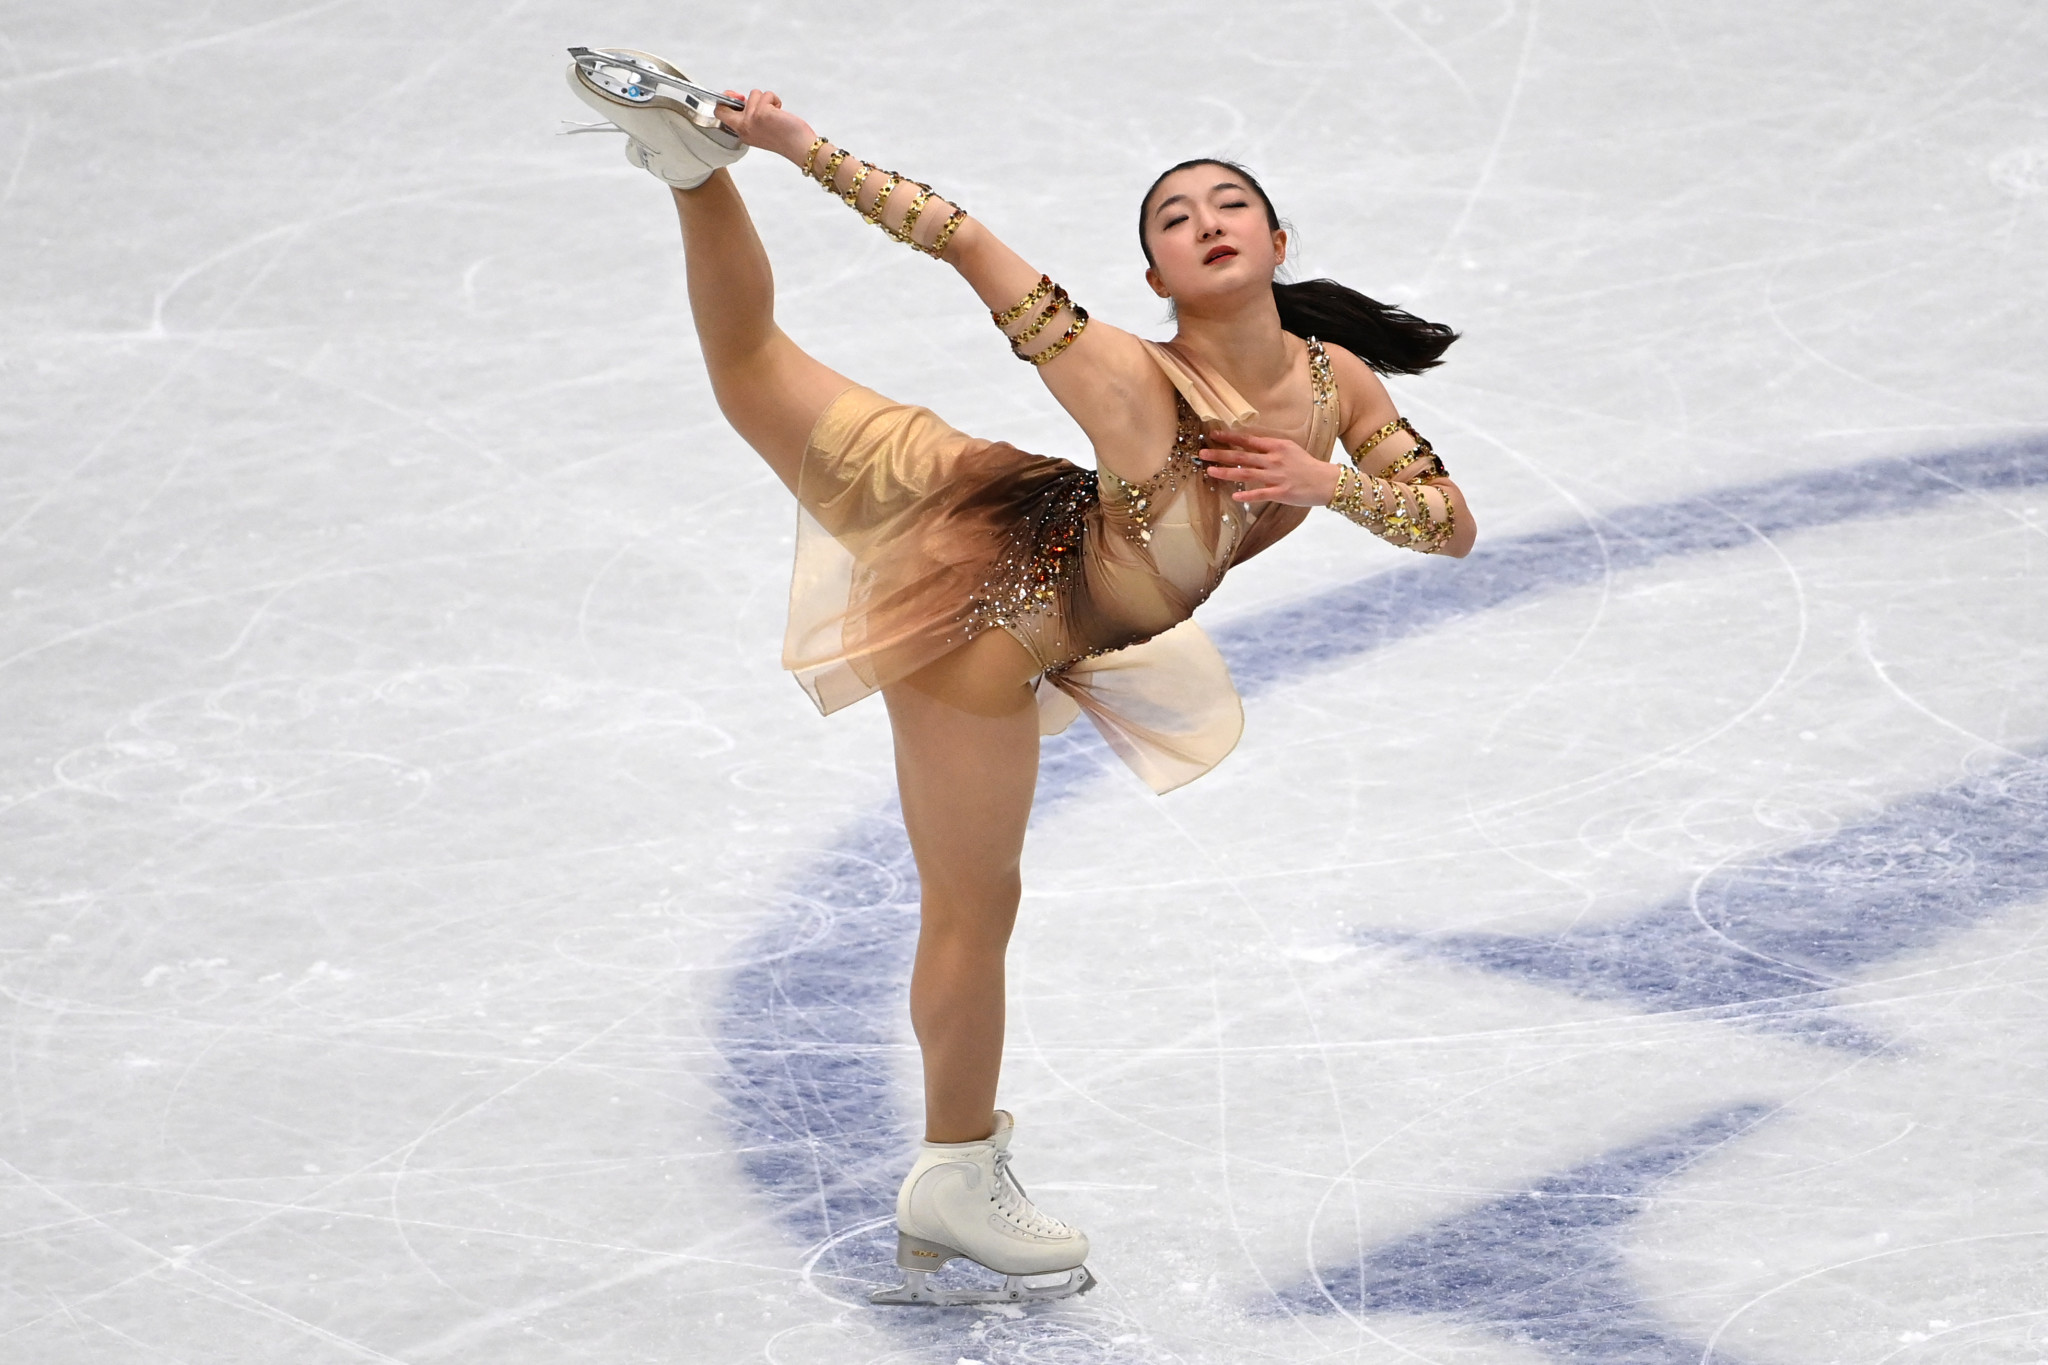 Kaori Sakamoto leads the women's singles event after a personal best score in the short programme ©Getty Images